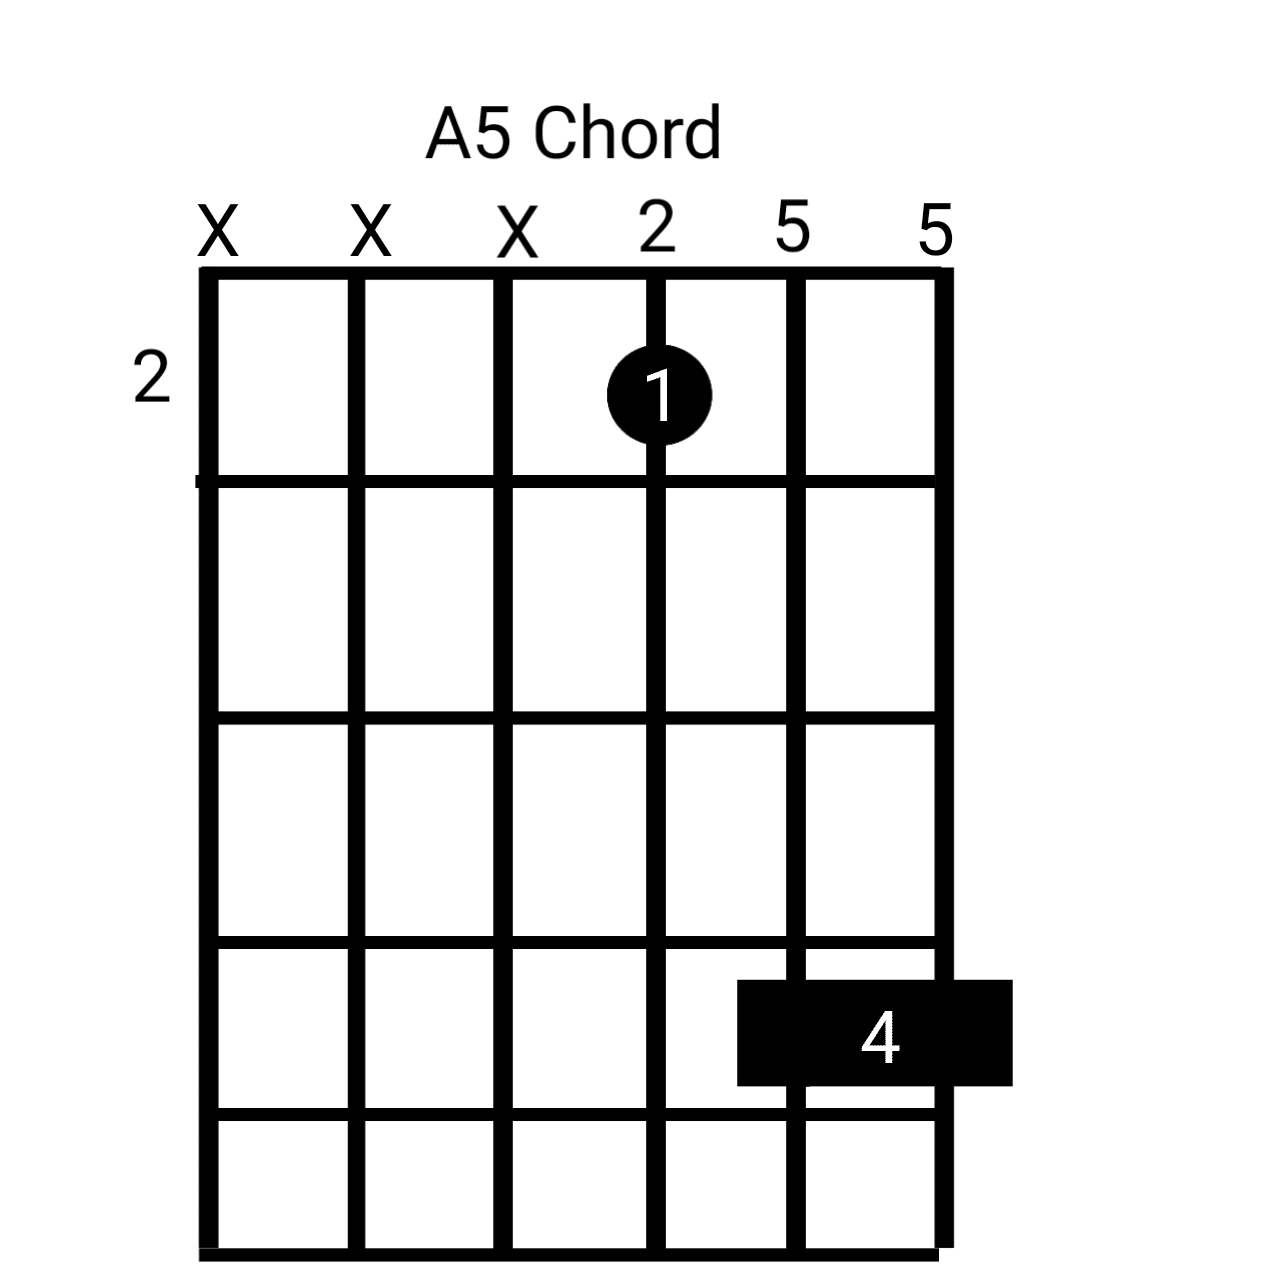 A5 Chord on 2nd fret